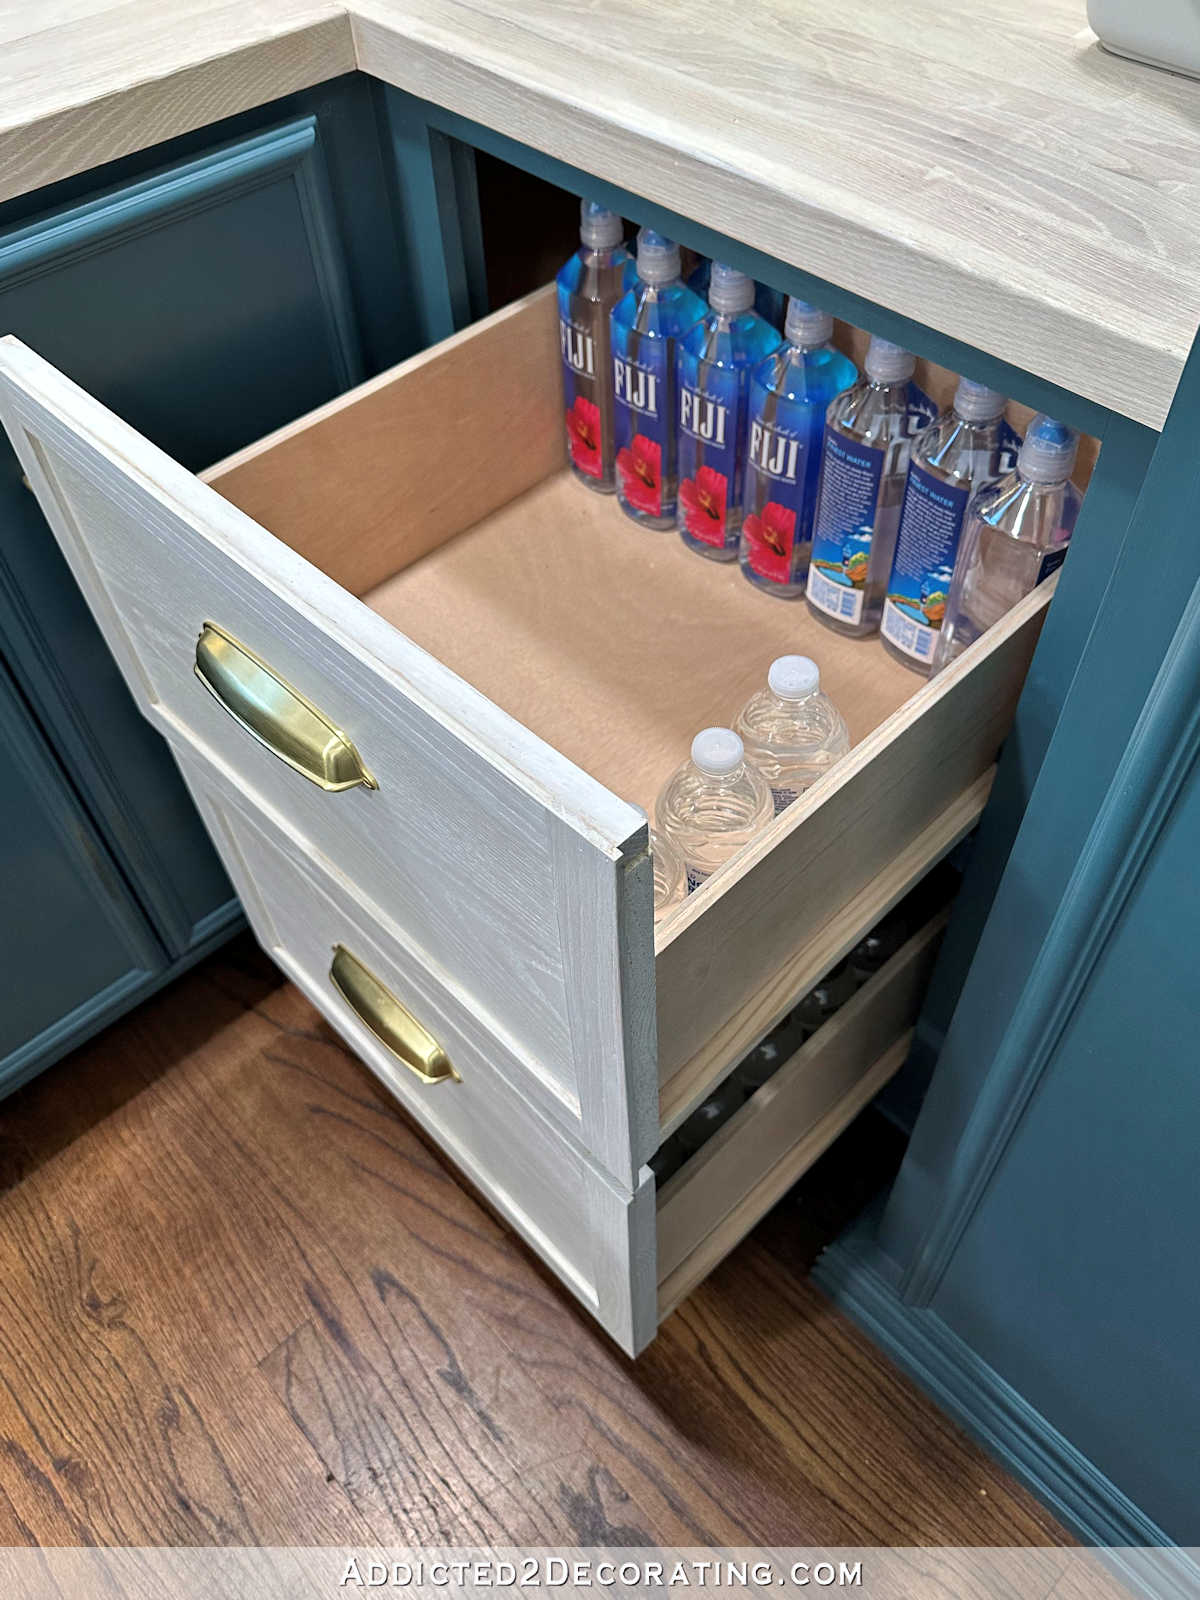 Design Mistakes I’ve Made — Our Pantry Drawers